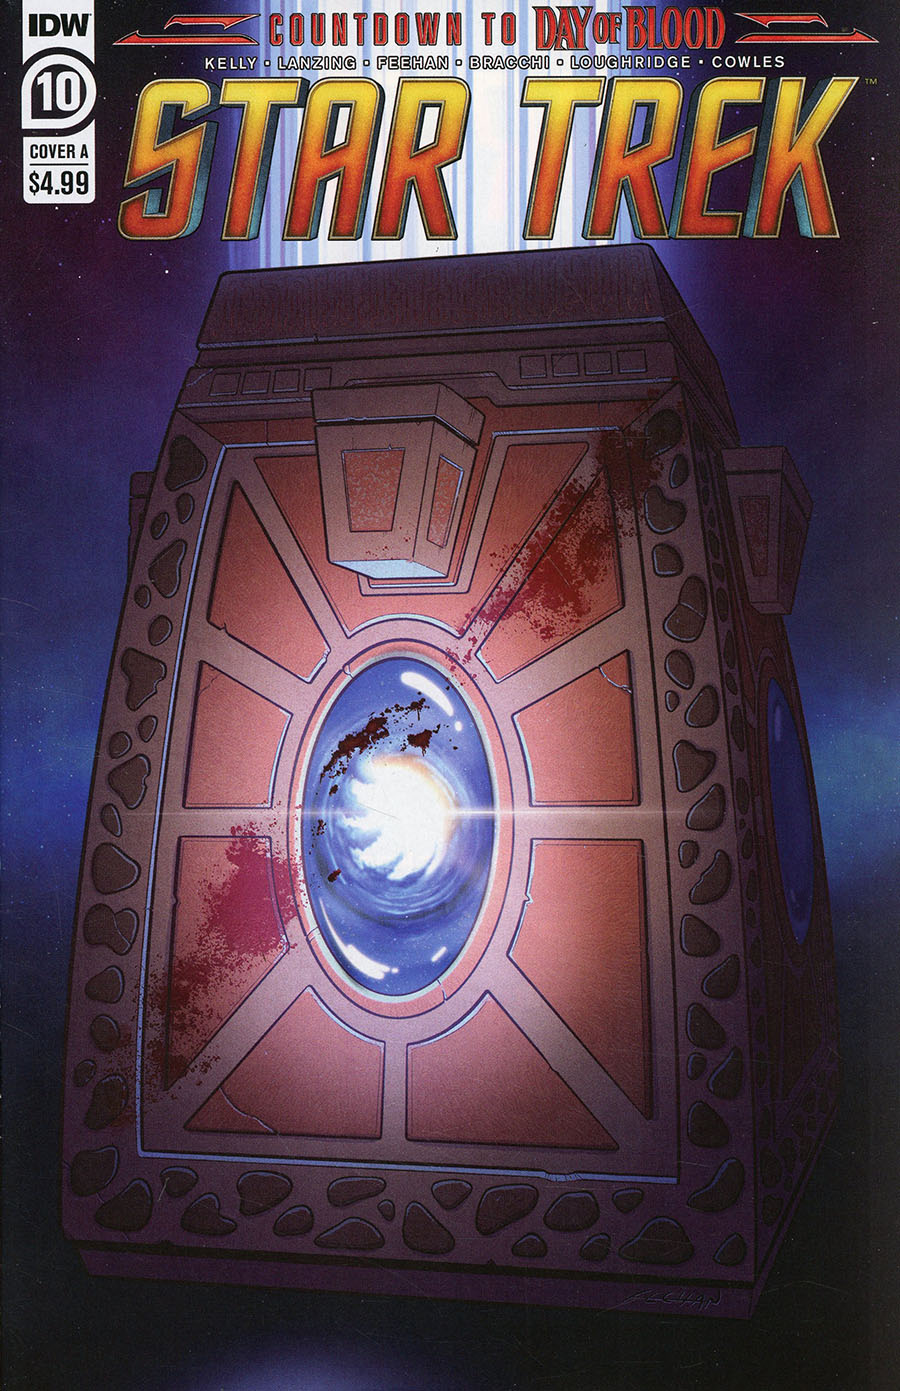 Star Trek (IDW) Vol 2 #10 Cover A Regular Mike Feehan Cover (Day Of Blood Prelude)